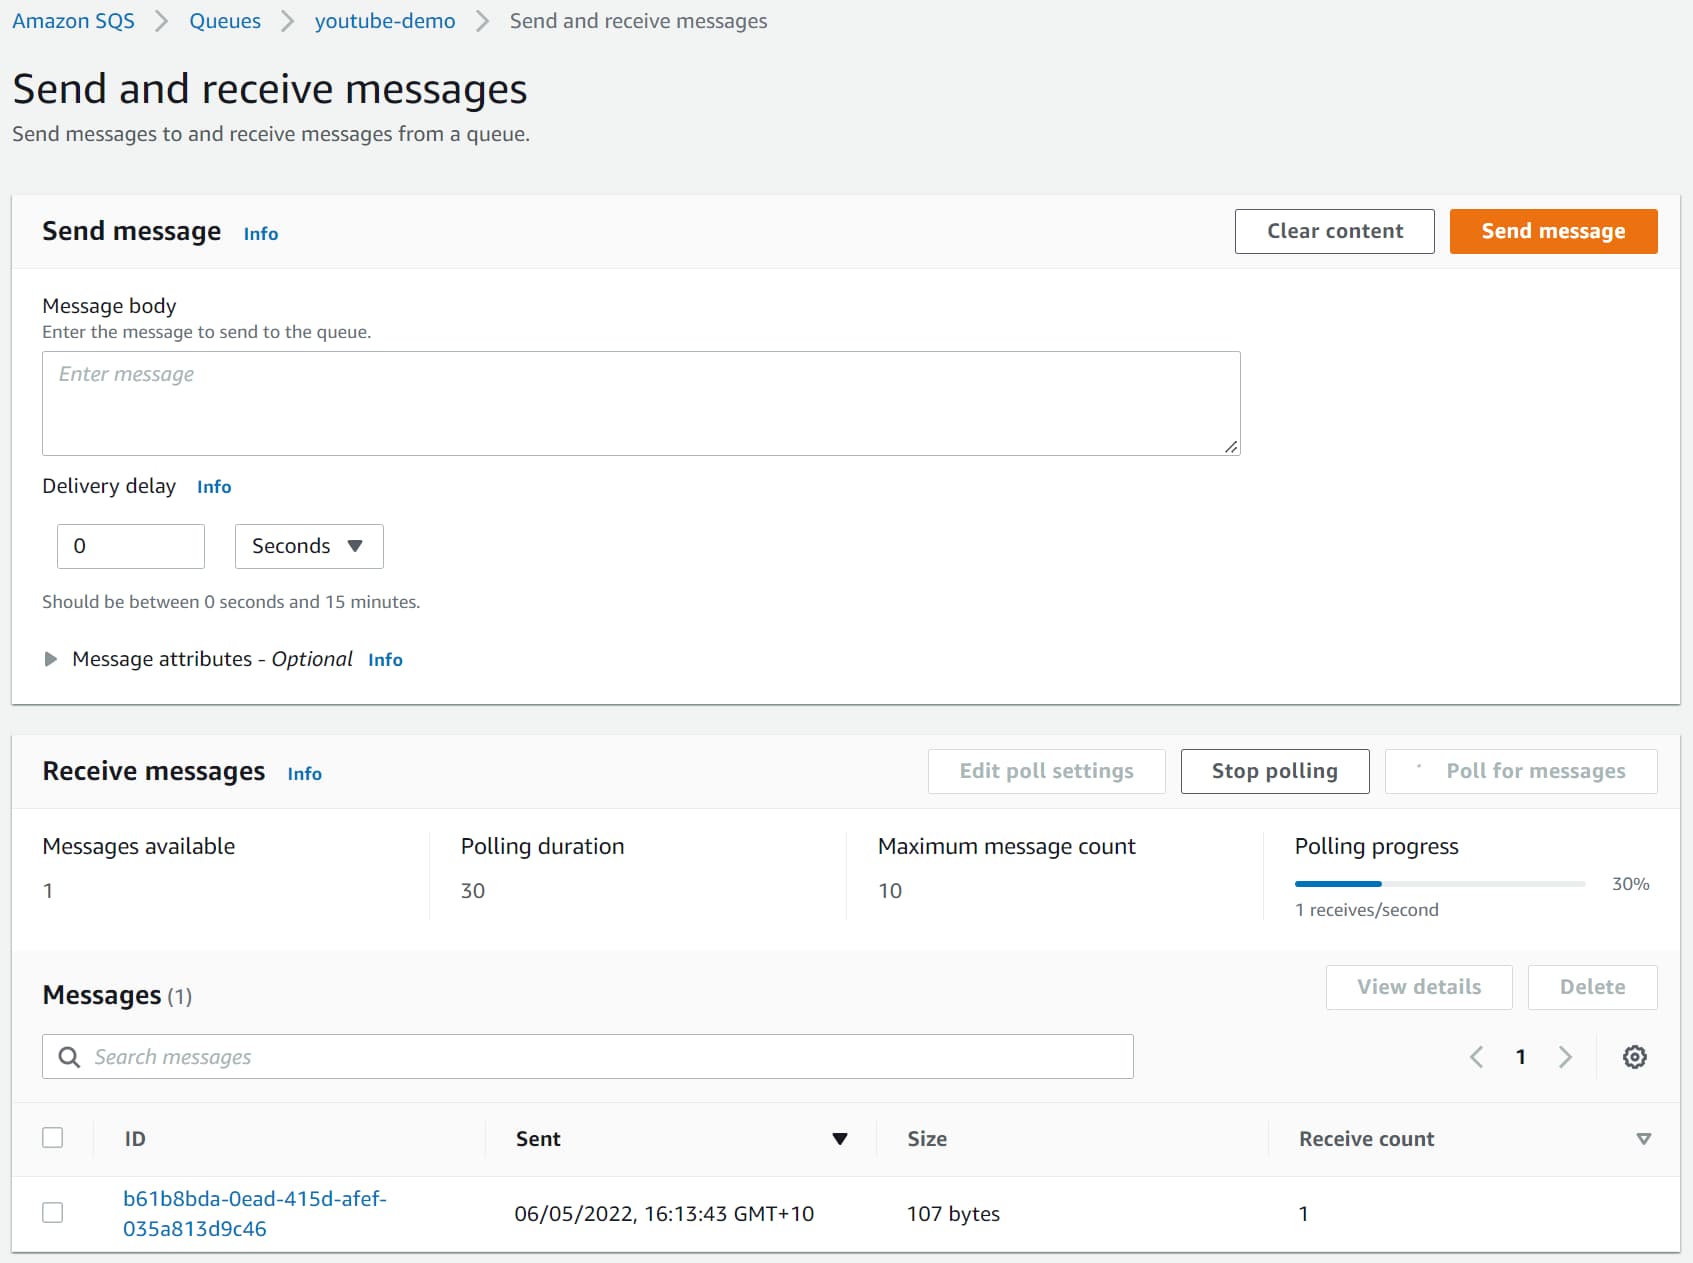 You can send and receive messages in  the AWS console